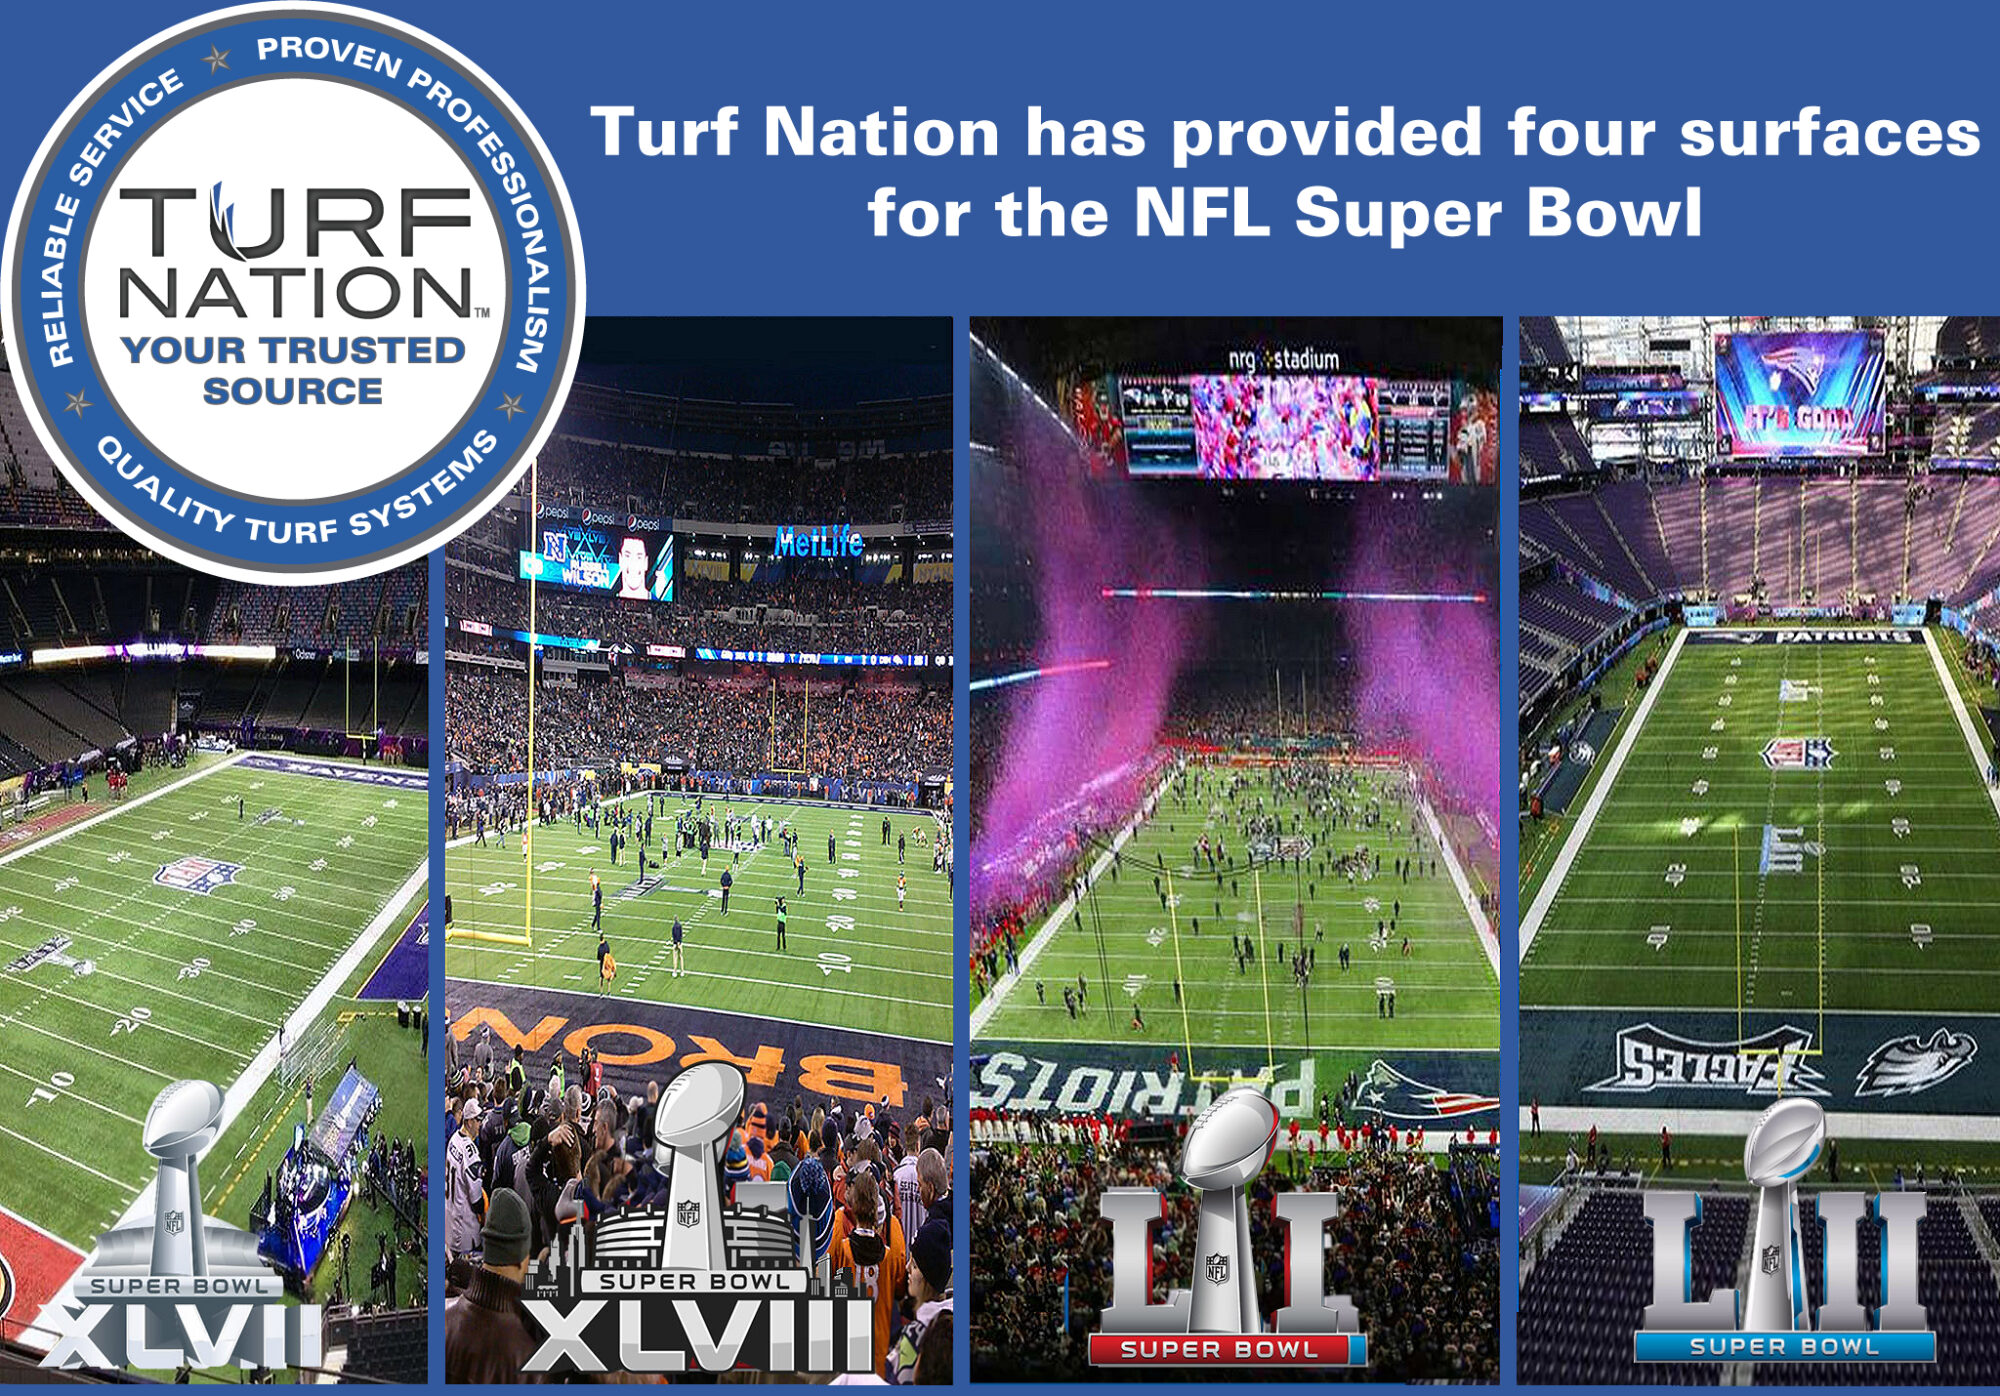 Turf Nation has provided four surfaces for the NFL Super Bowl